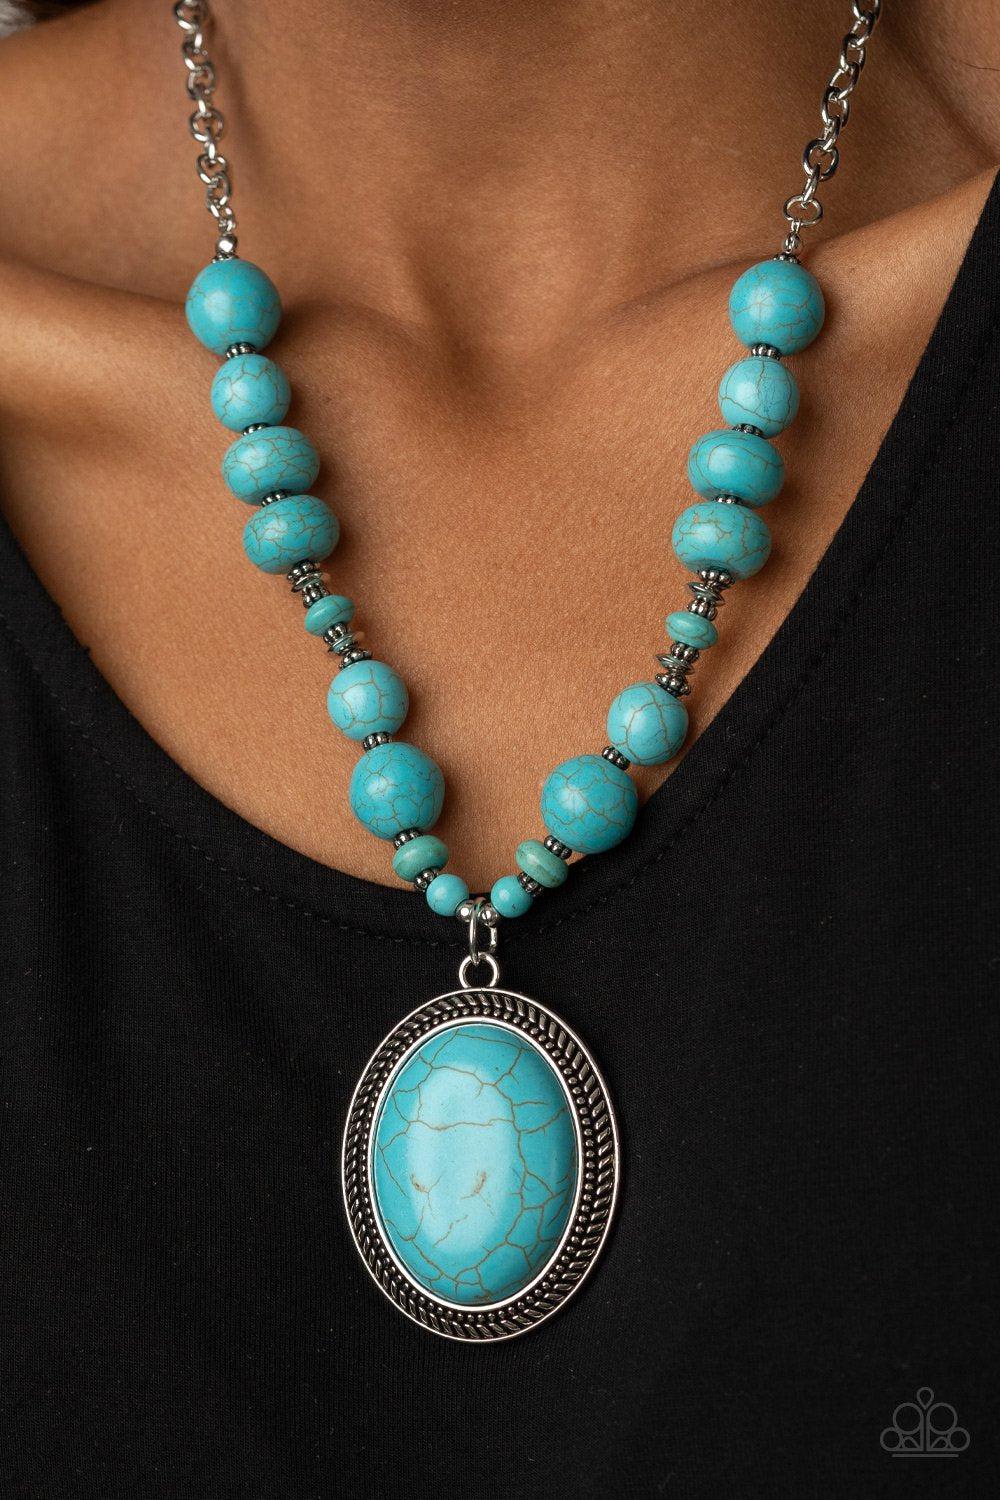 Home Sweet HOMESTEAD Turquoise Blue Stone and Silver Necklace - Paparazzi Accessories-CarasShop.com - $5 Jewelry by Cara Jewels